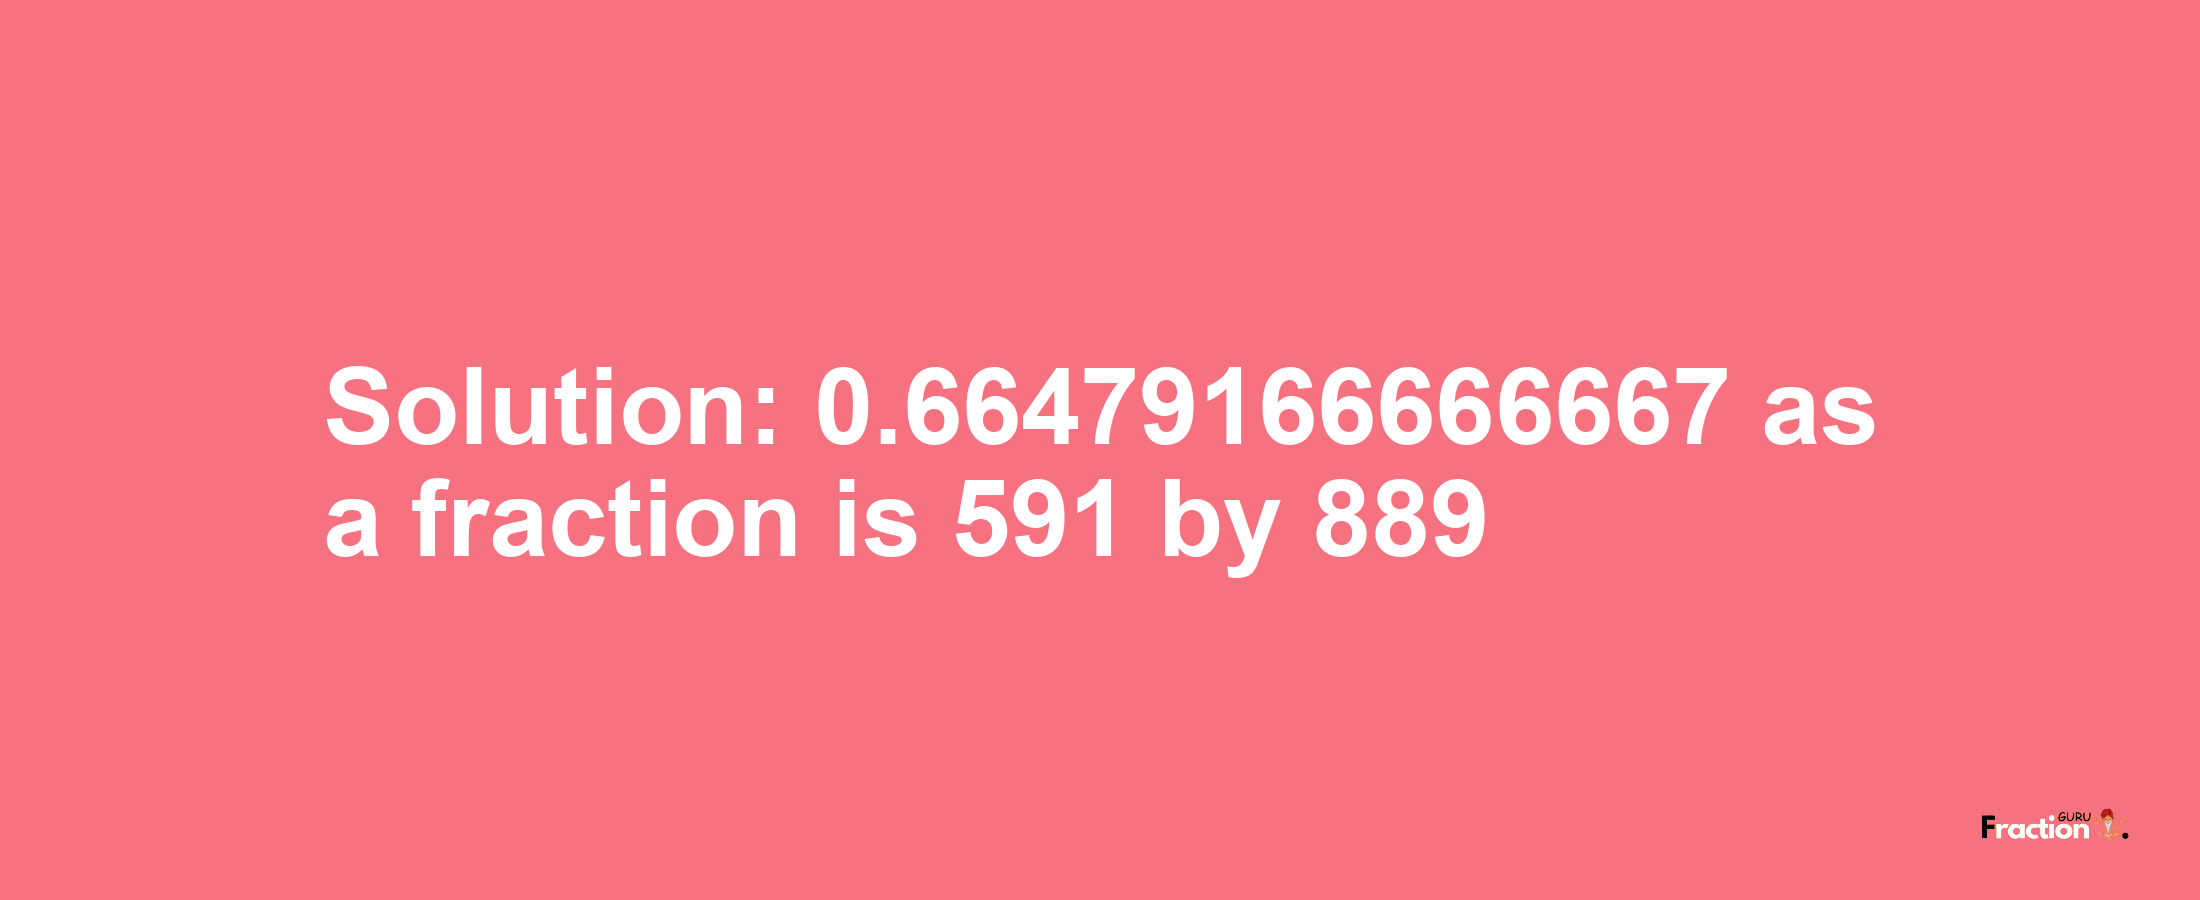 Solution:0.66479166666667 as a fraction is 591/889